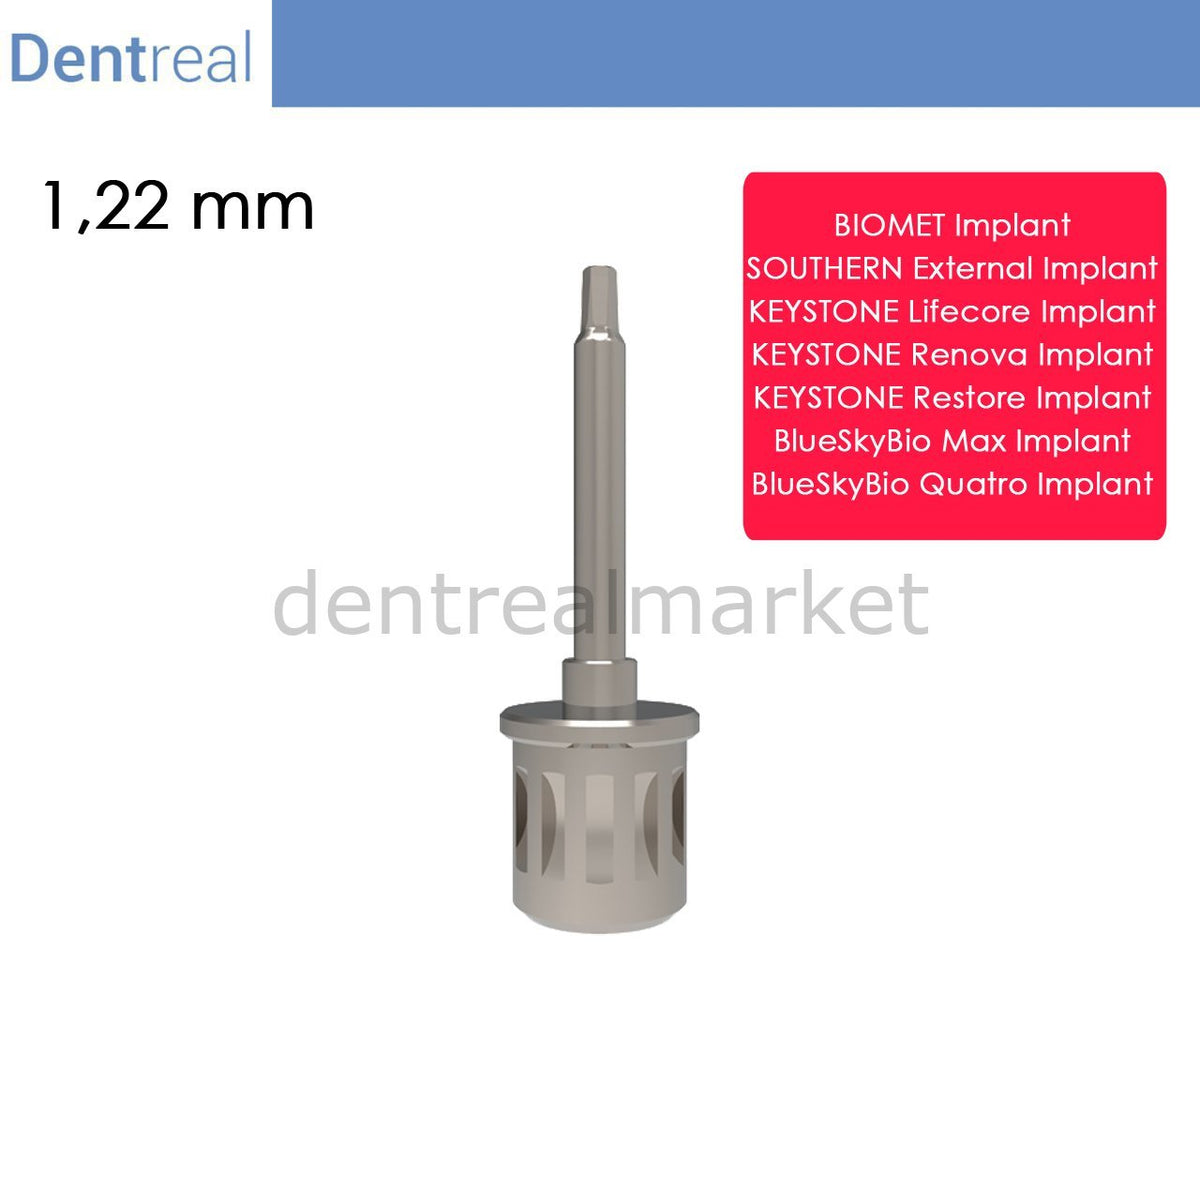 DentrealStore - Dentreal Screwdriver for Southern External Implant - 1,22mm Hex Driver